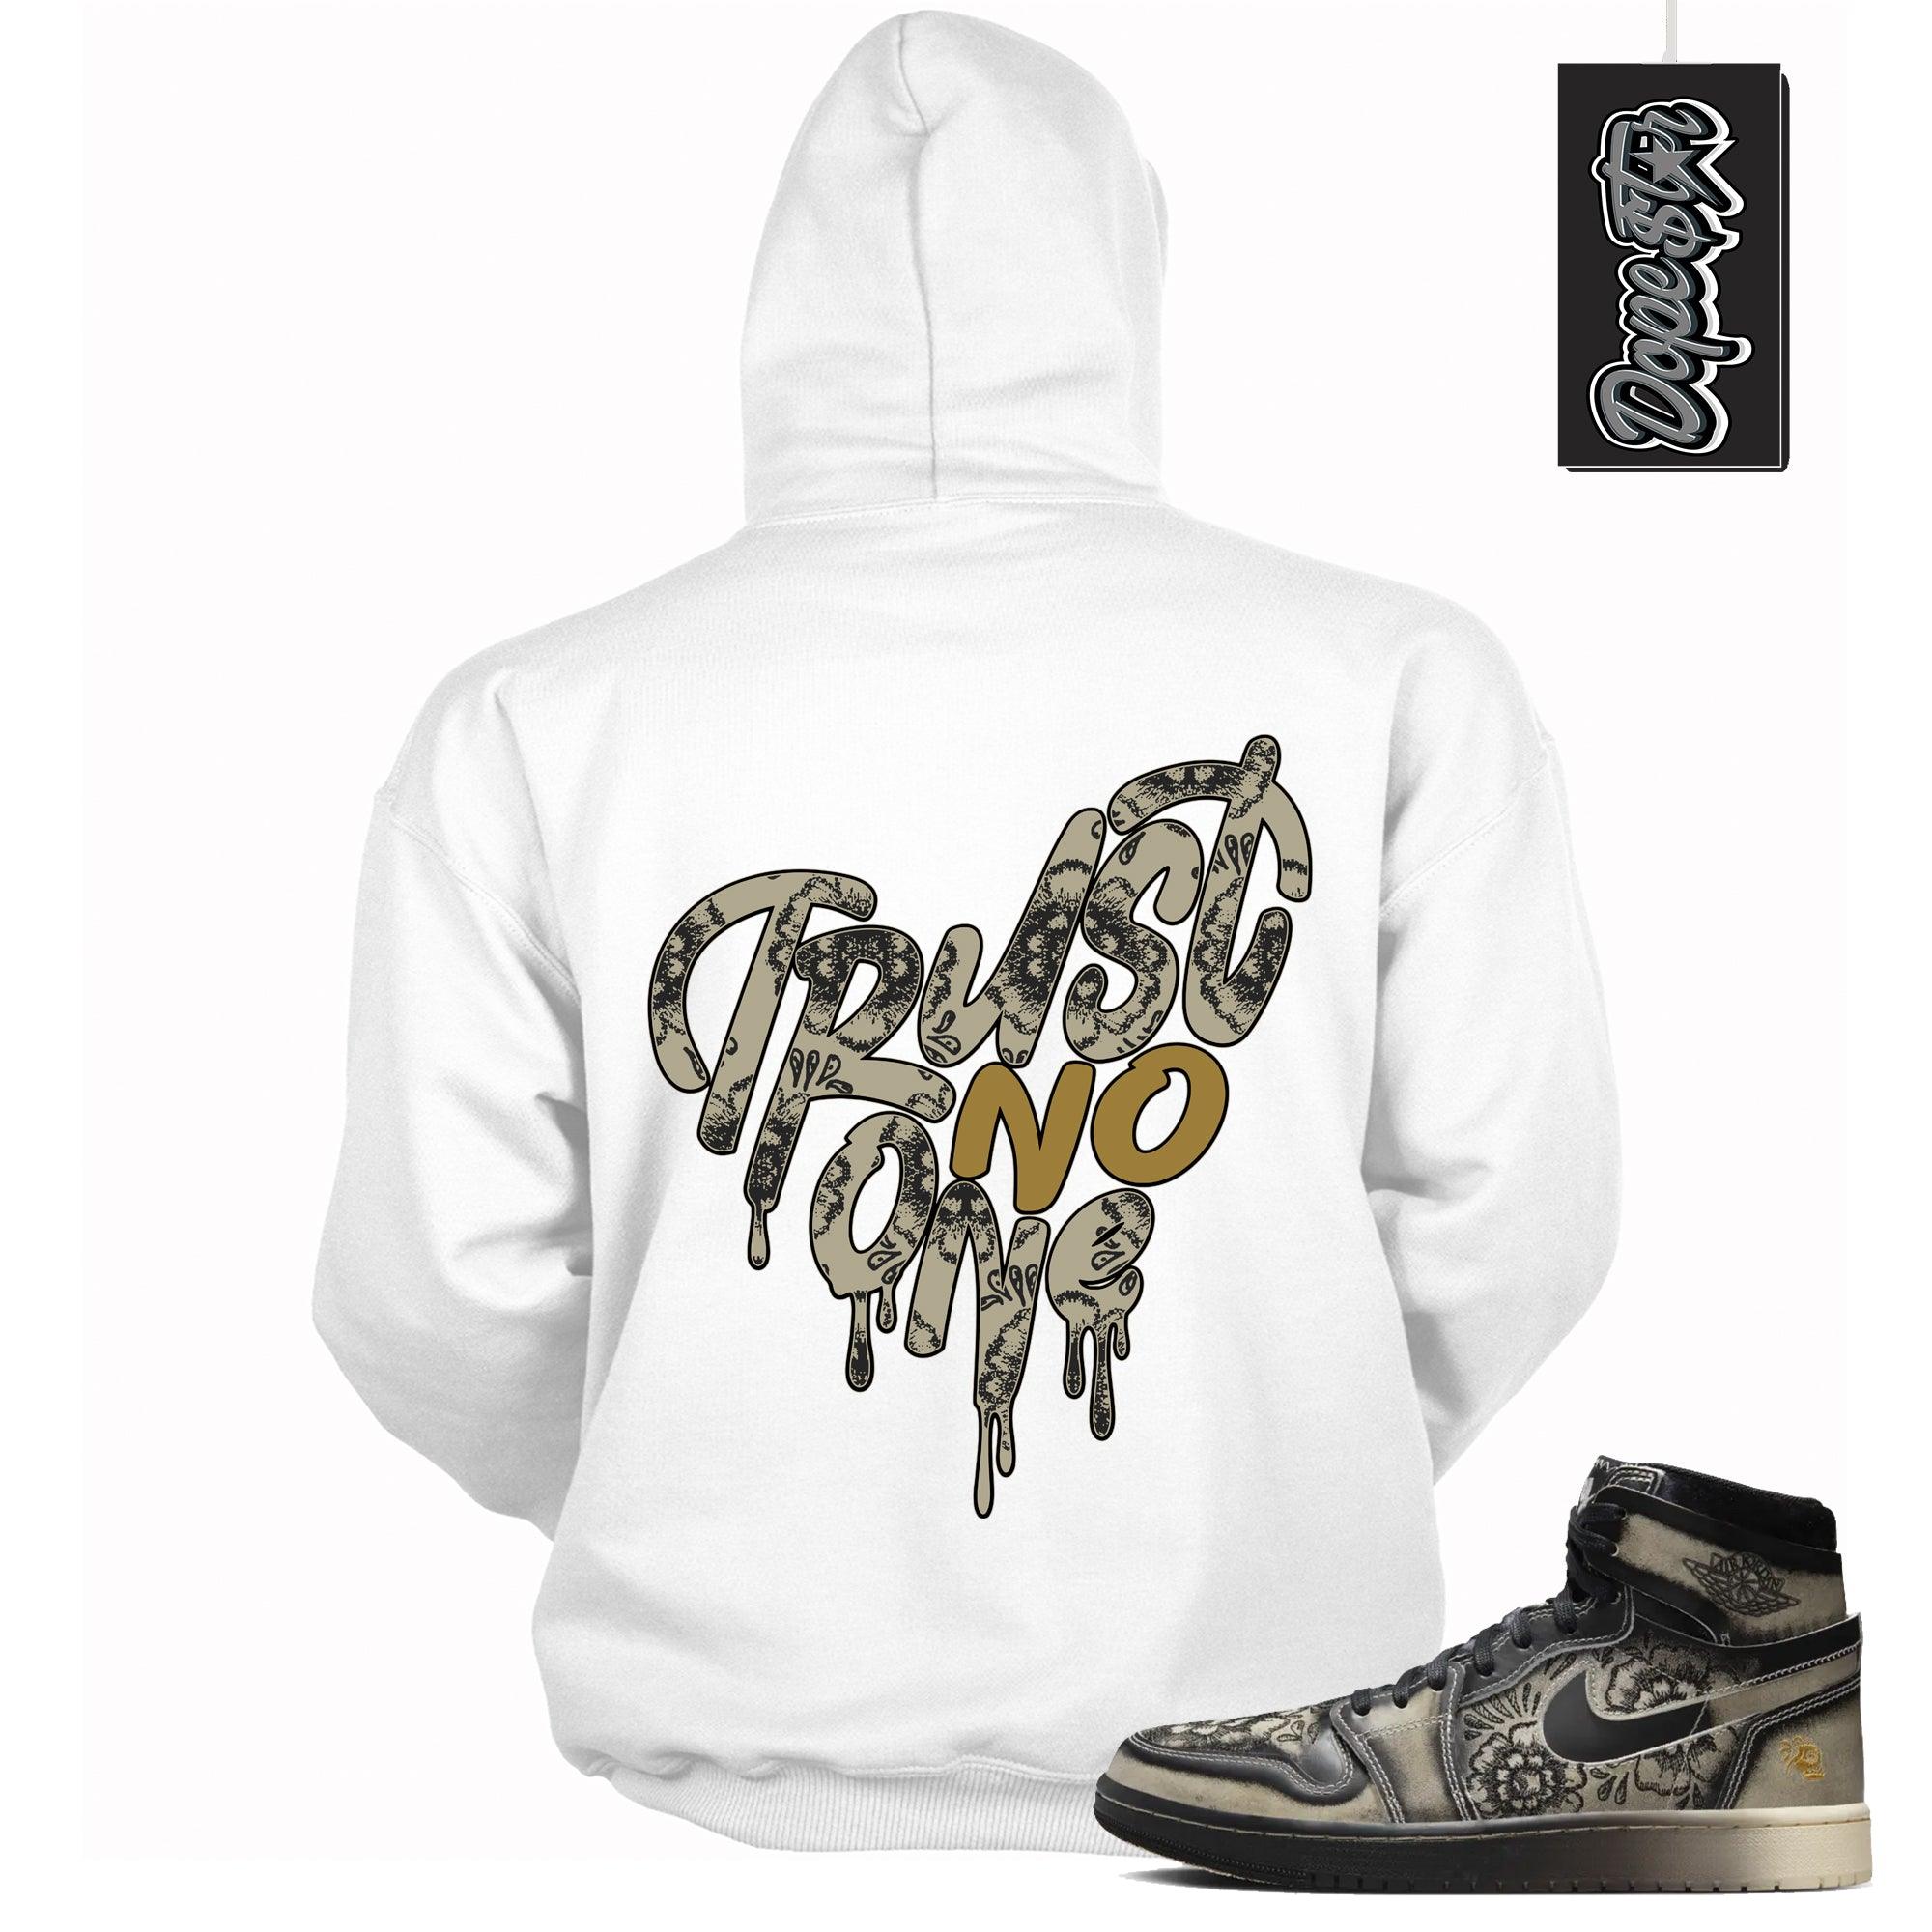 Cool White Graphic Hoodie with “ Trust No One Heart “ print, that perfectly matches Air Jordan 1 High Zoom Comfort 2 Dia de Muertos Black and Pale Ivory sneakers